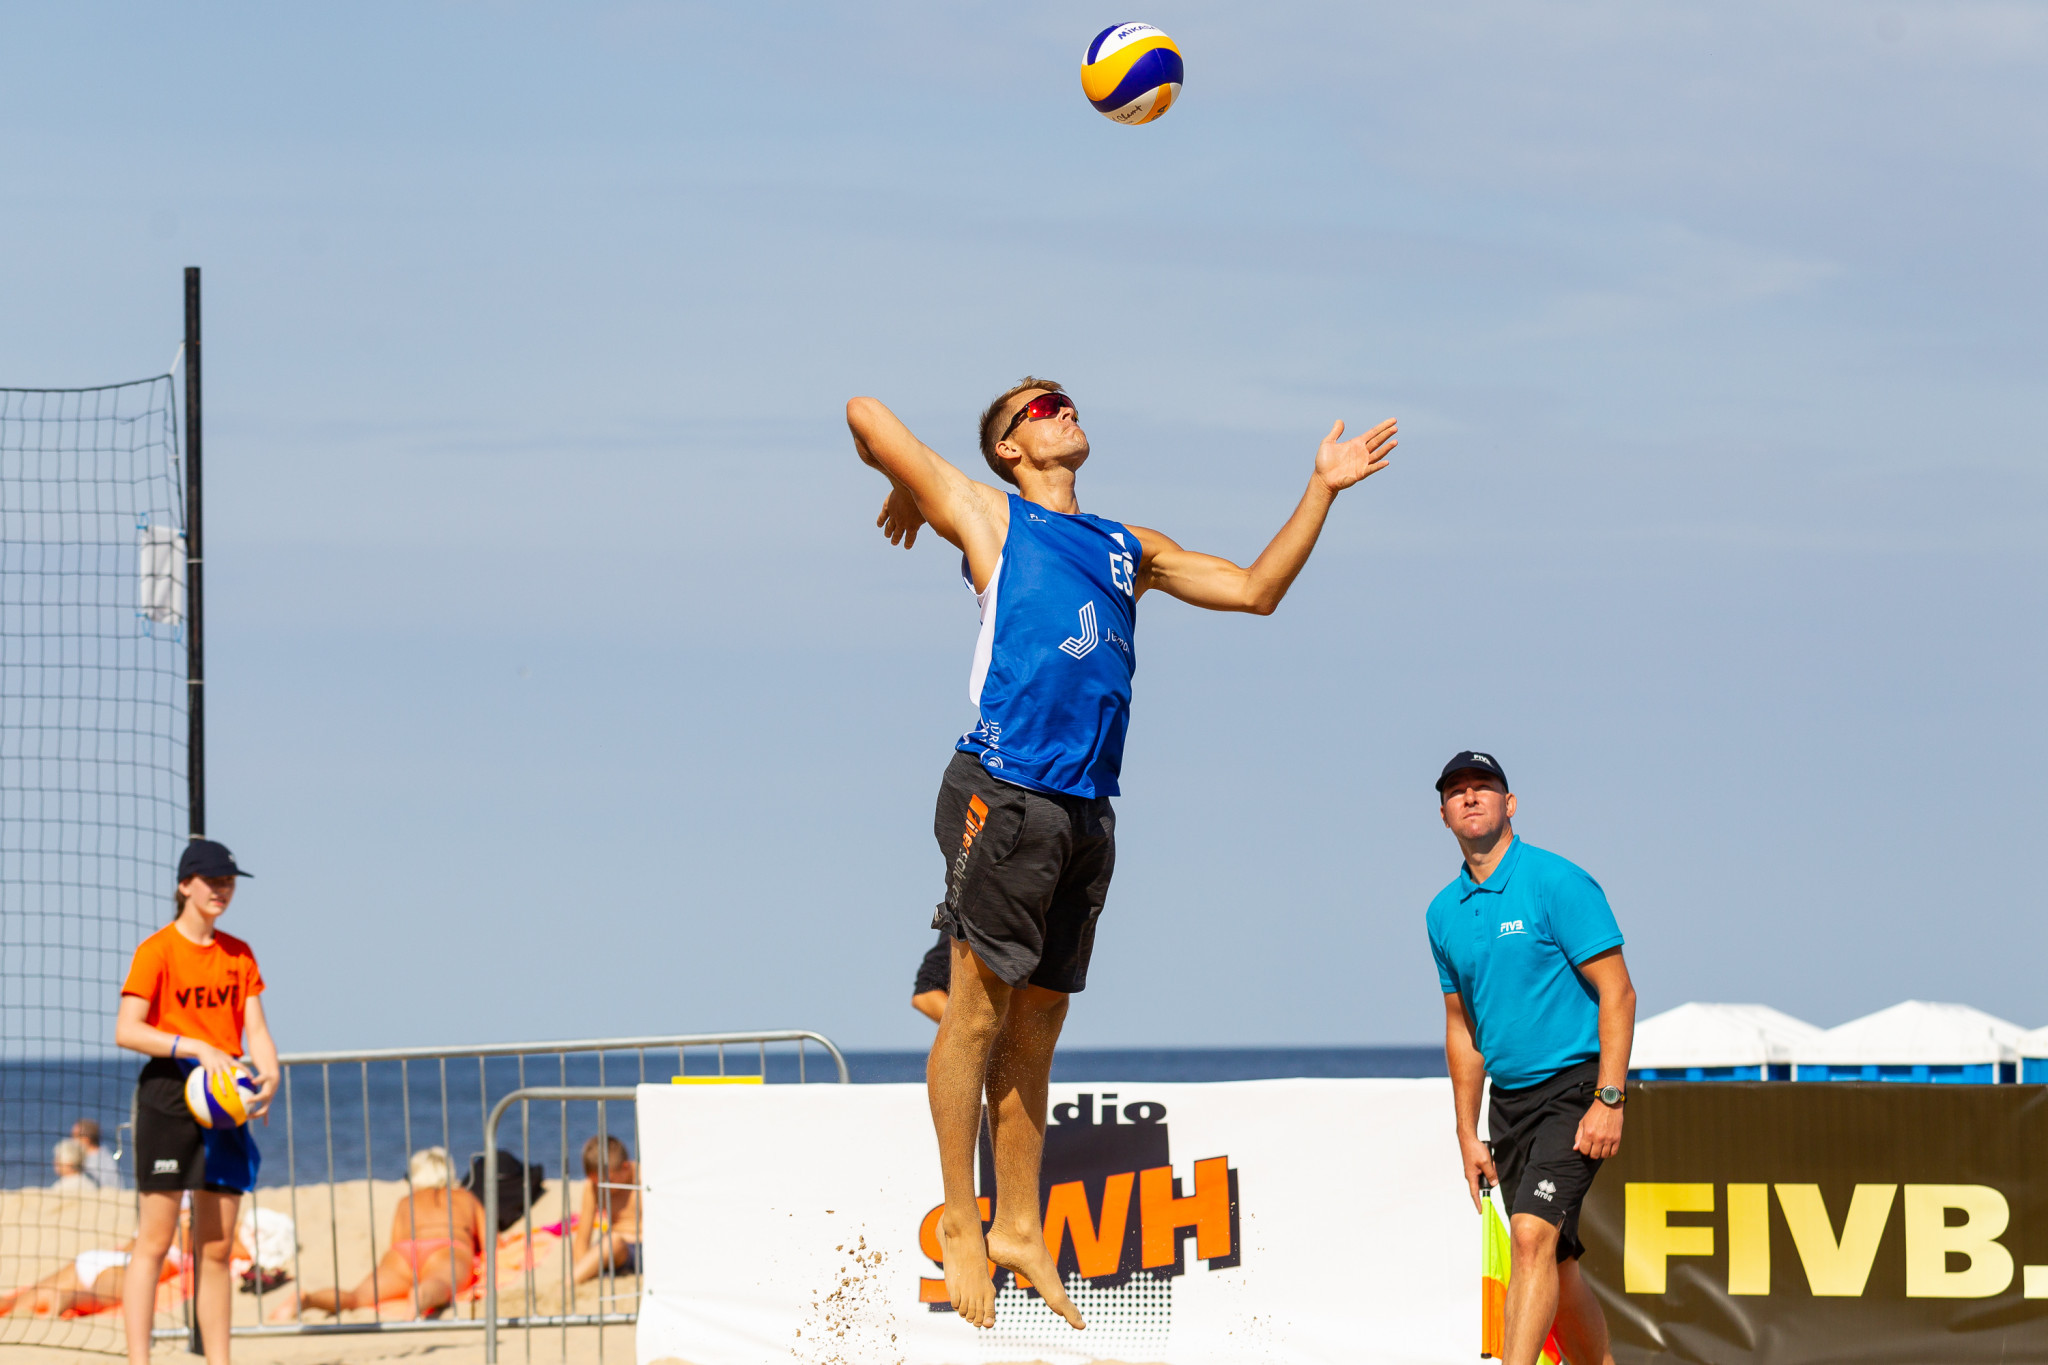 Estonians Kusti Nõlvak and Mart Tiisaar reached the semi-finals with victory against Stafford Slick and William Allen from the United States ©FIVB